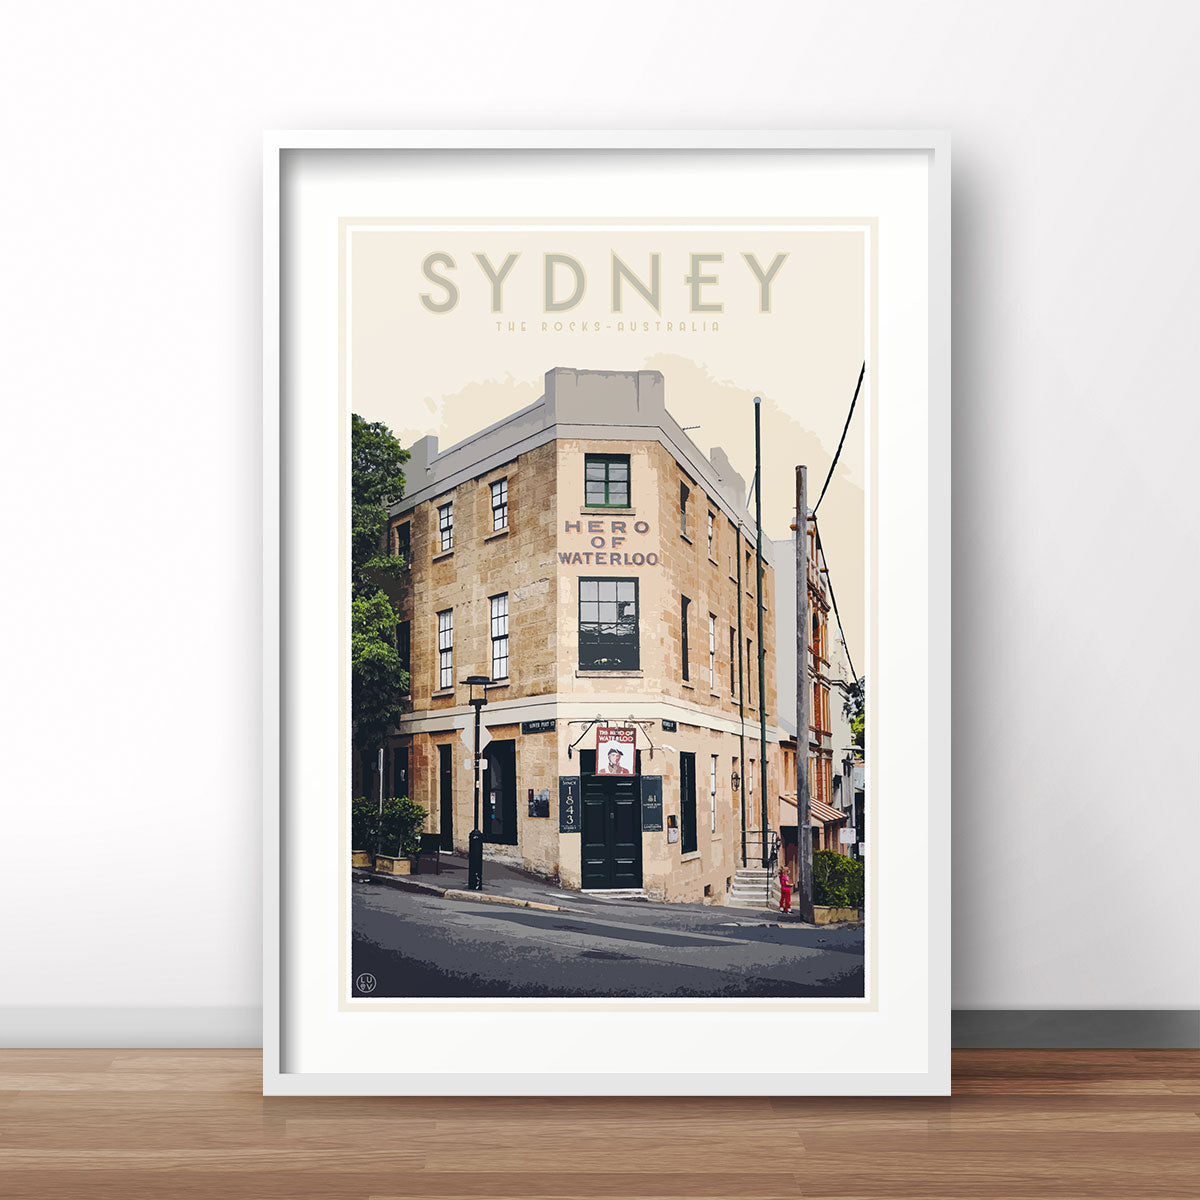 Sydney the rocks vintage retro poster print from Places We Luv